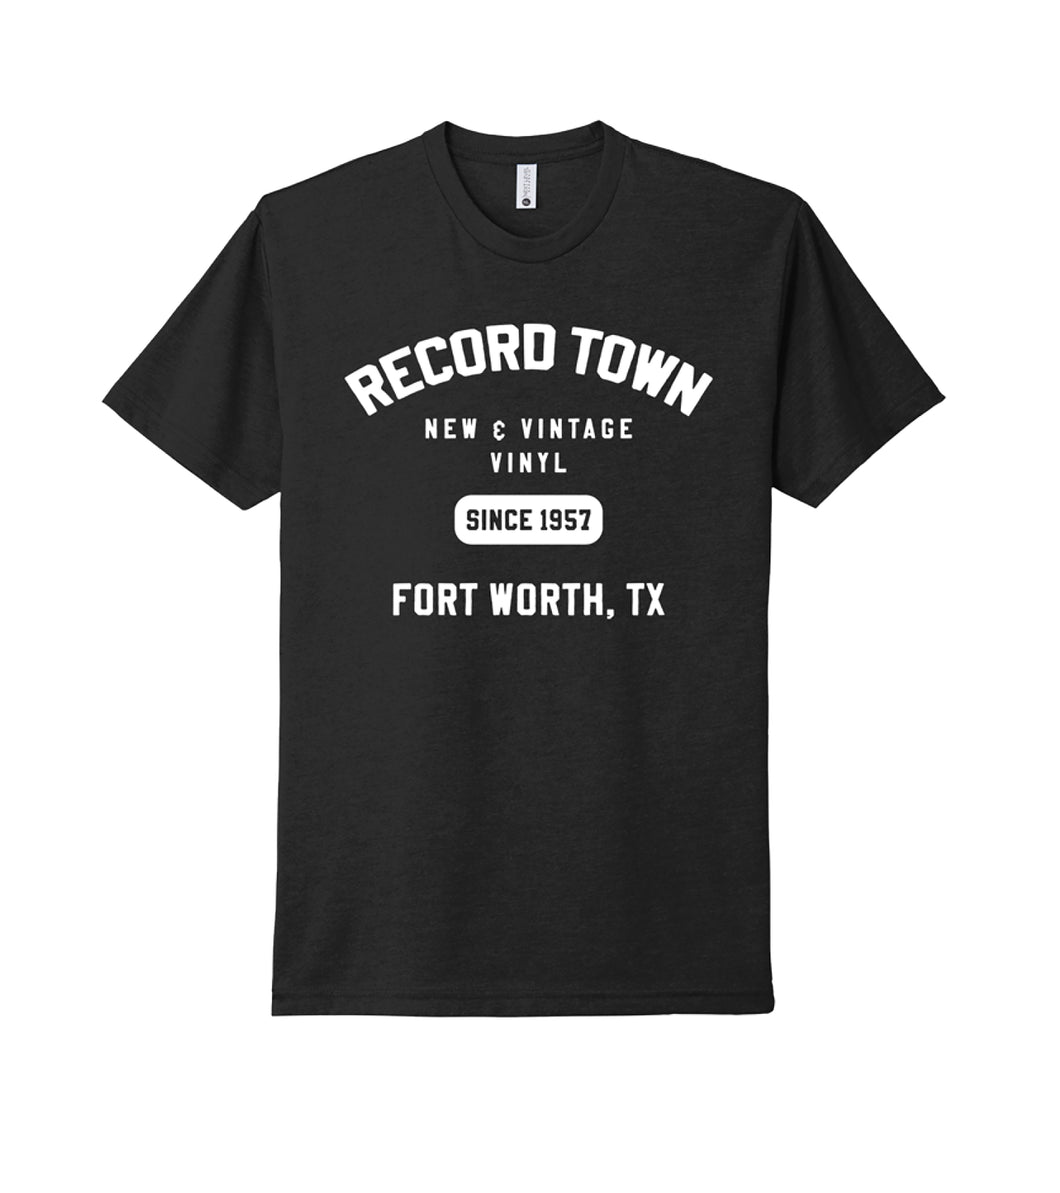 Record Town athletic style or throwback PE Style T-Shirt in Black with White Lettering